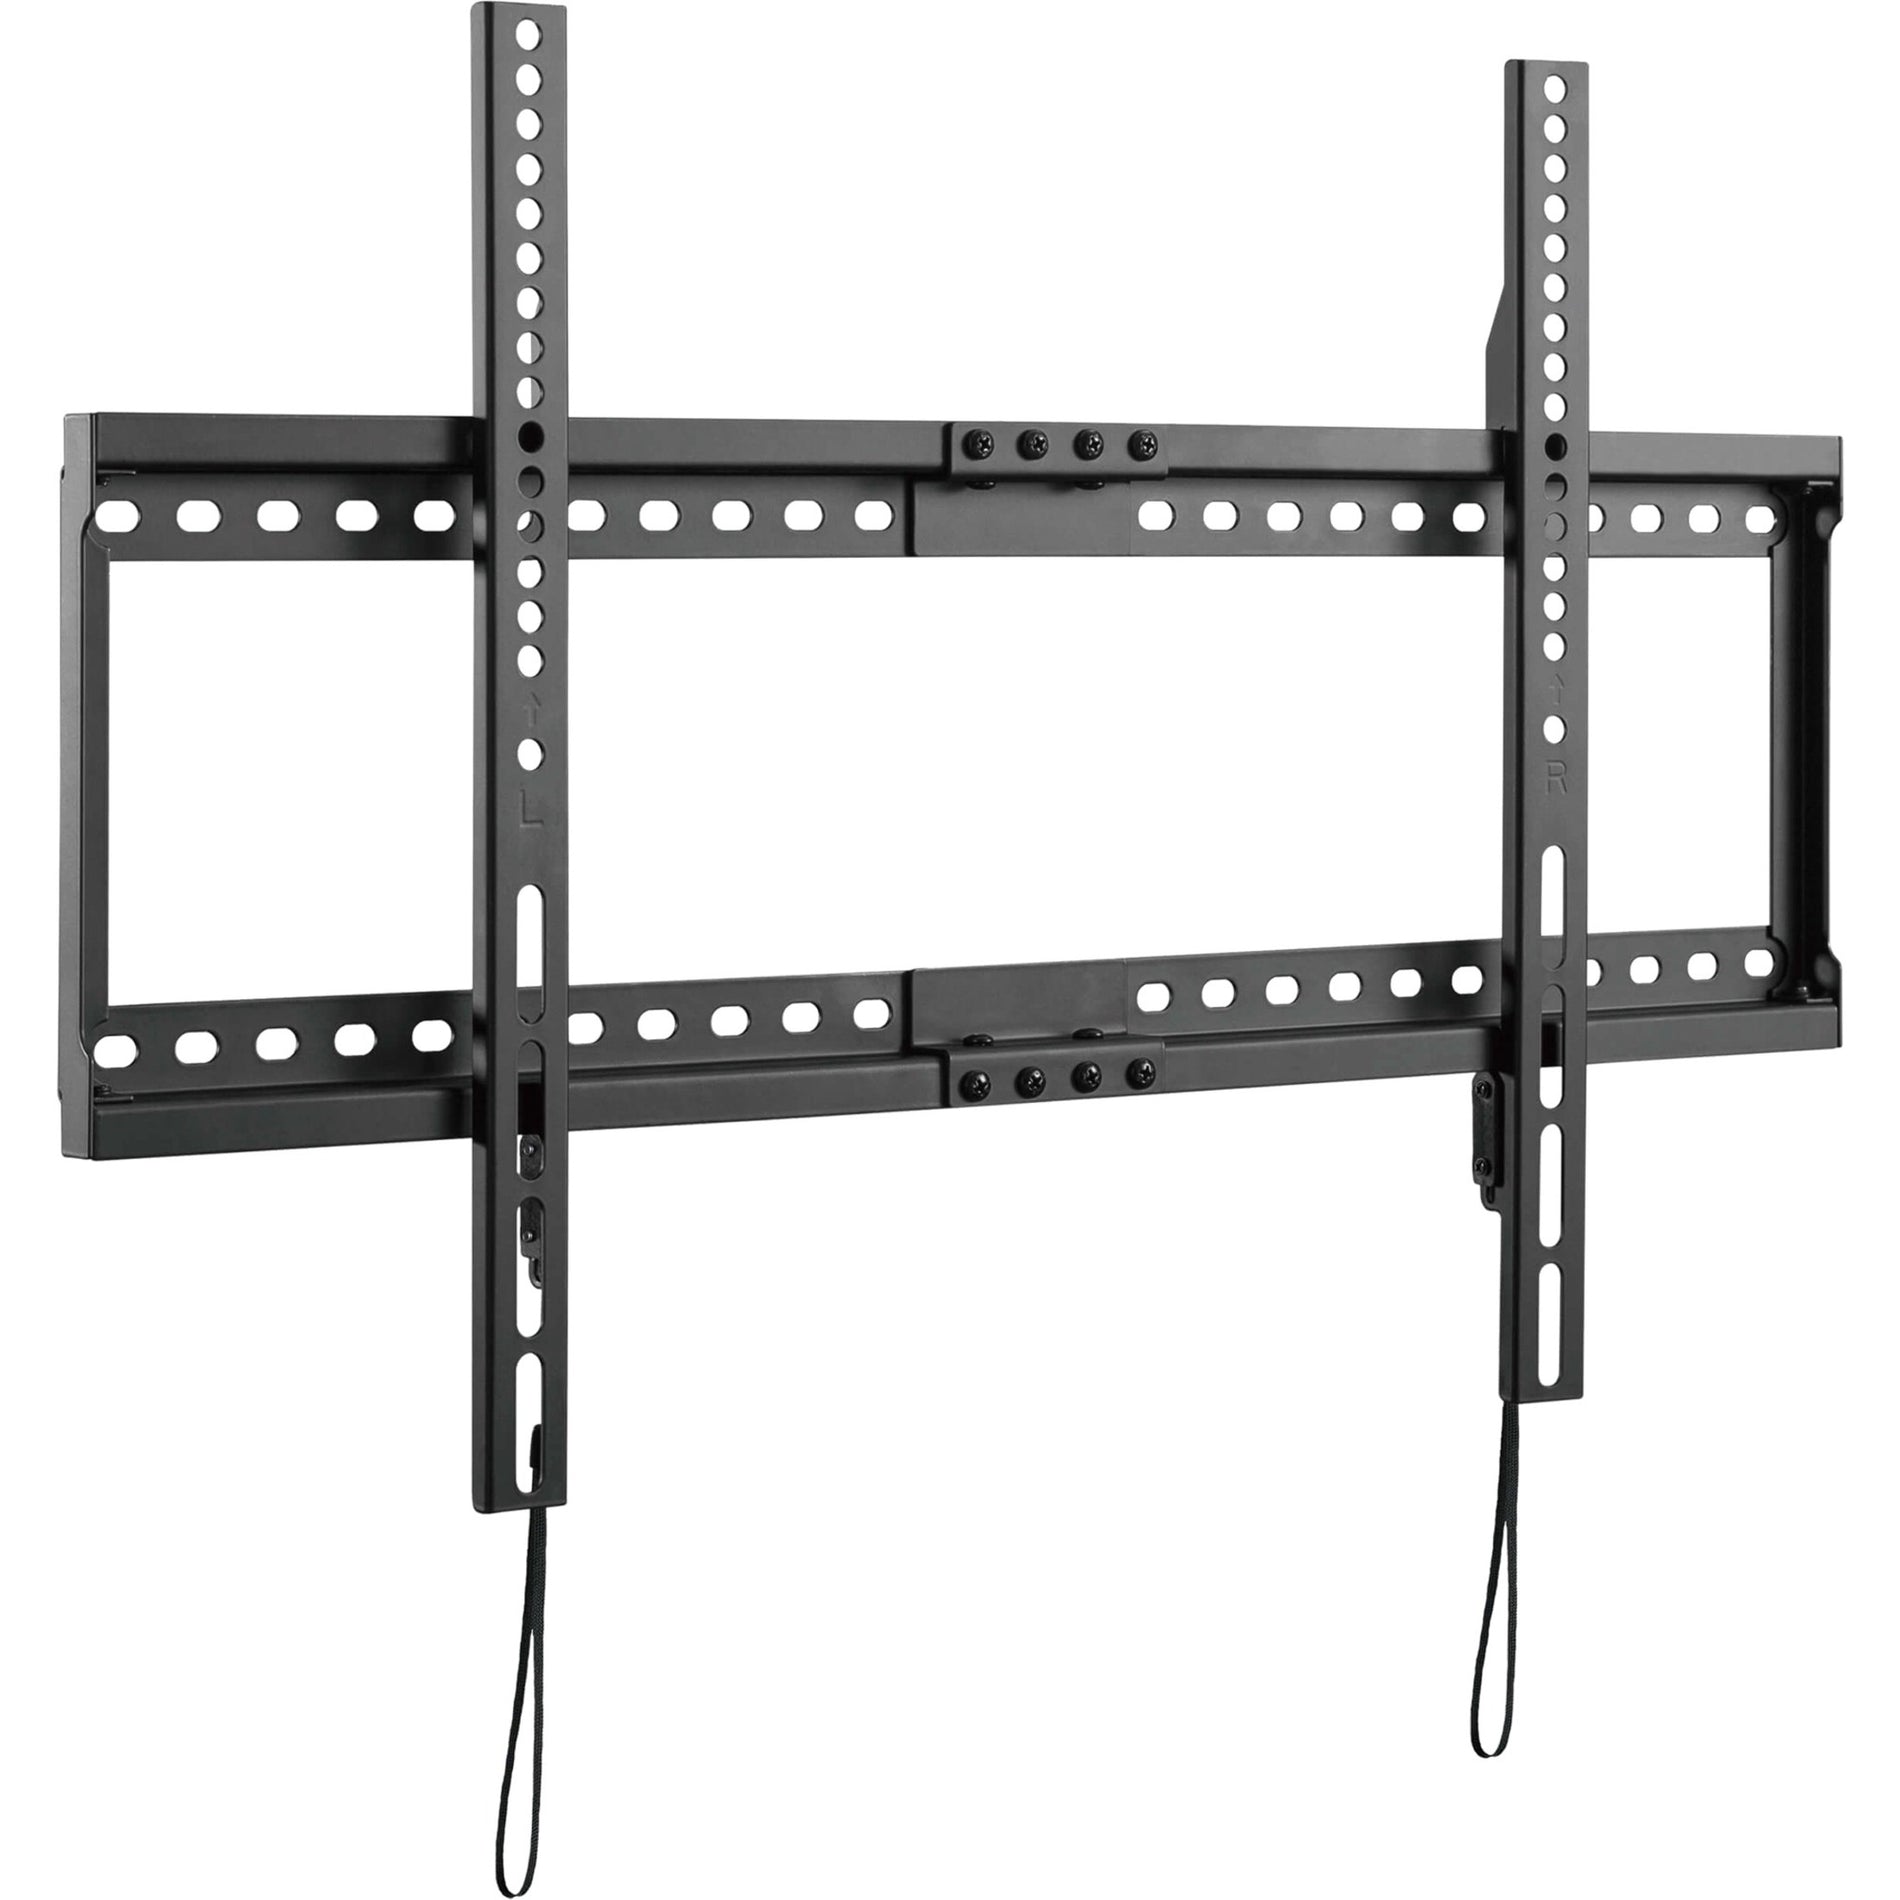 Tripp Lite DWF3780X Fixed TV Wall Mount for 37" to 80" Displays, Low Profile, 165 lb Load Capacity